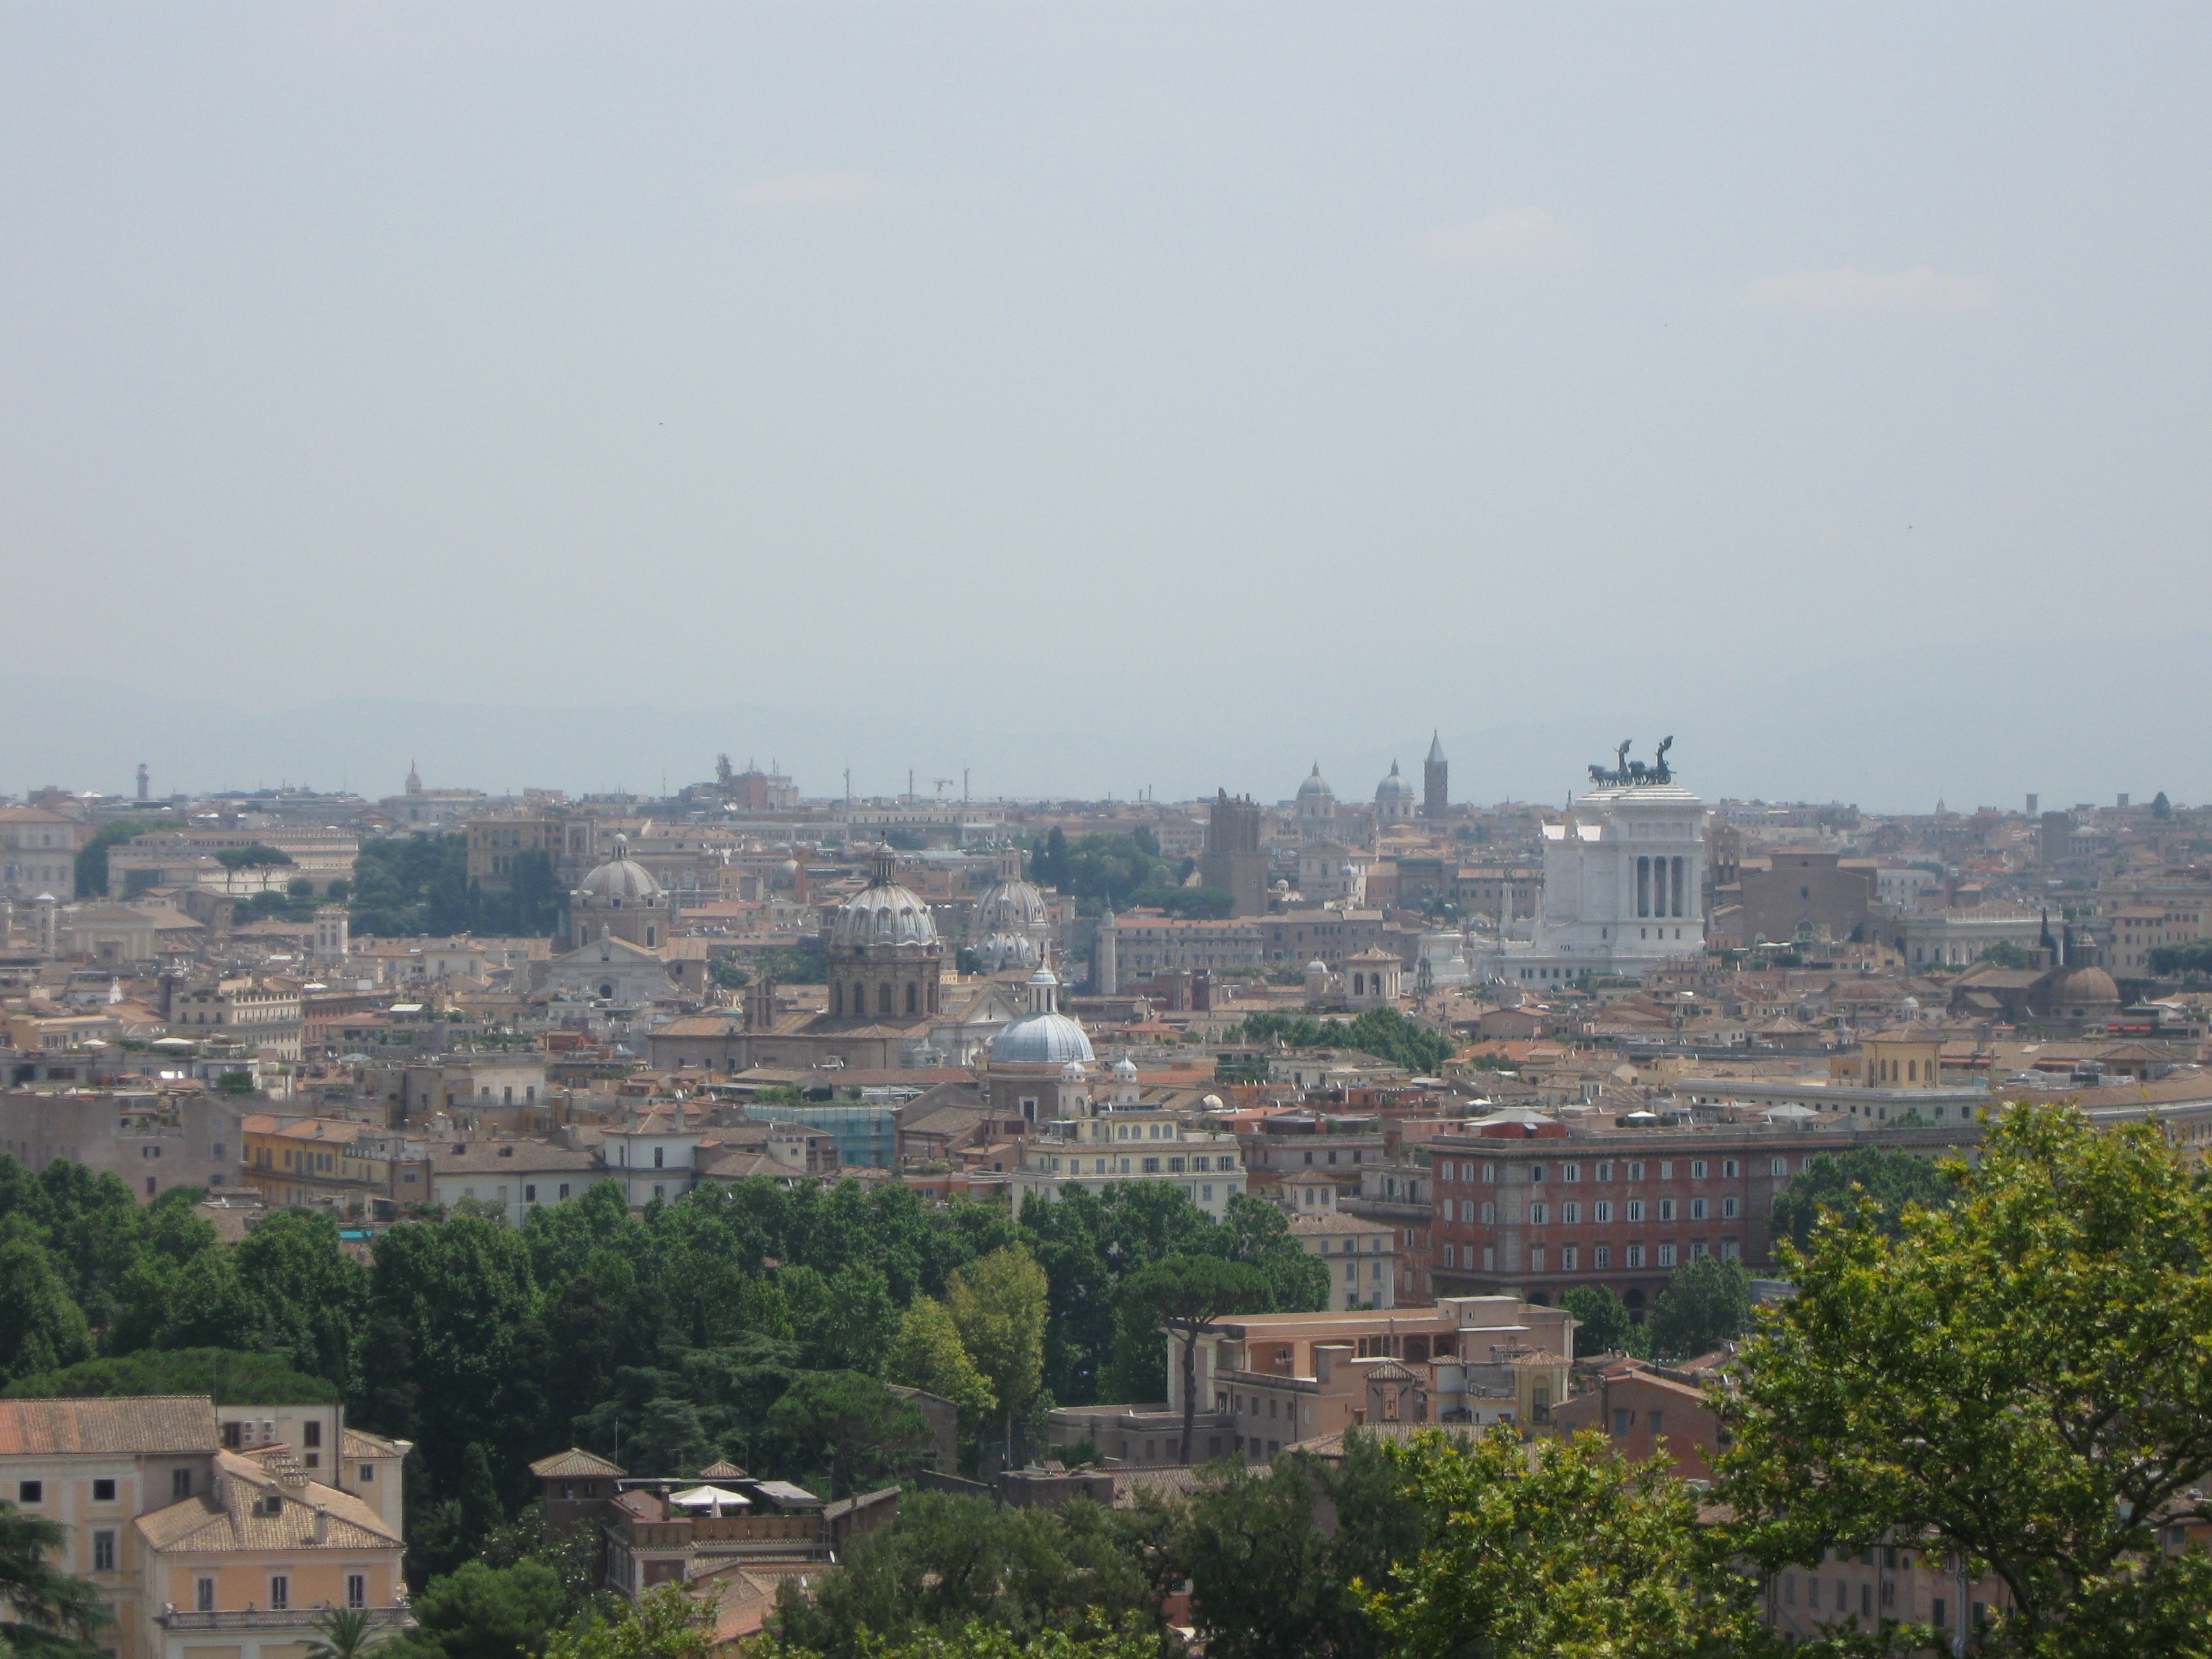 View of Rome from Gianicolo Hill, Italy